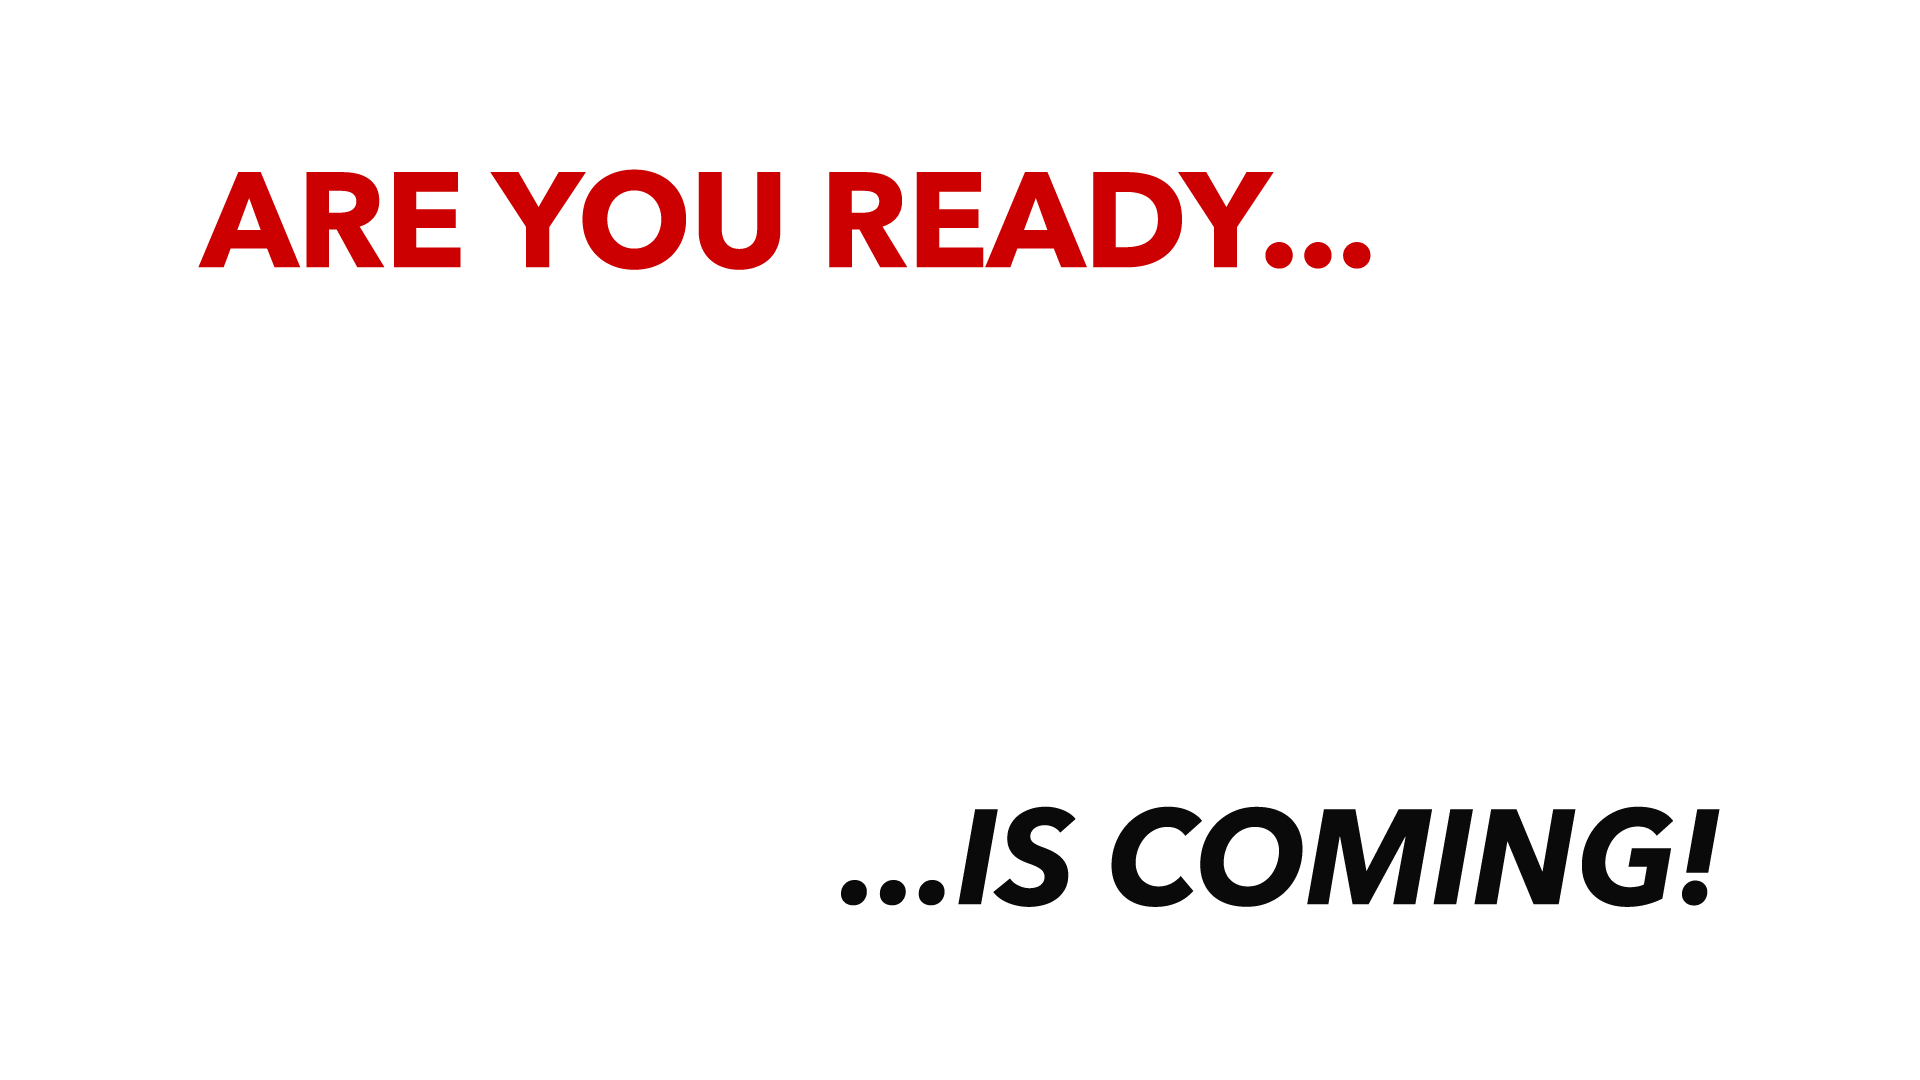 Fitness On Demand is Coming Soon to Family Fitness Centers